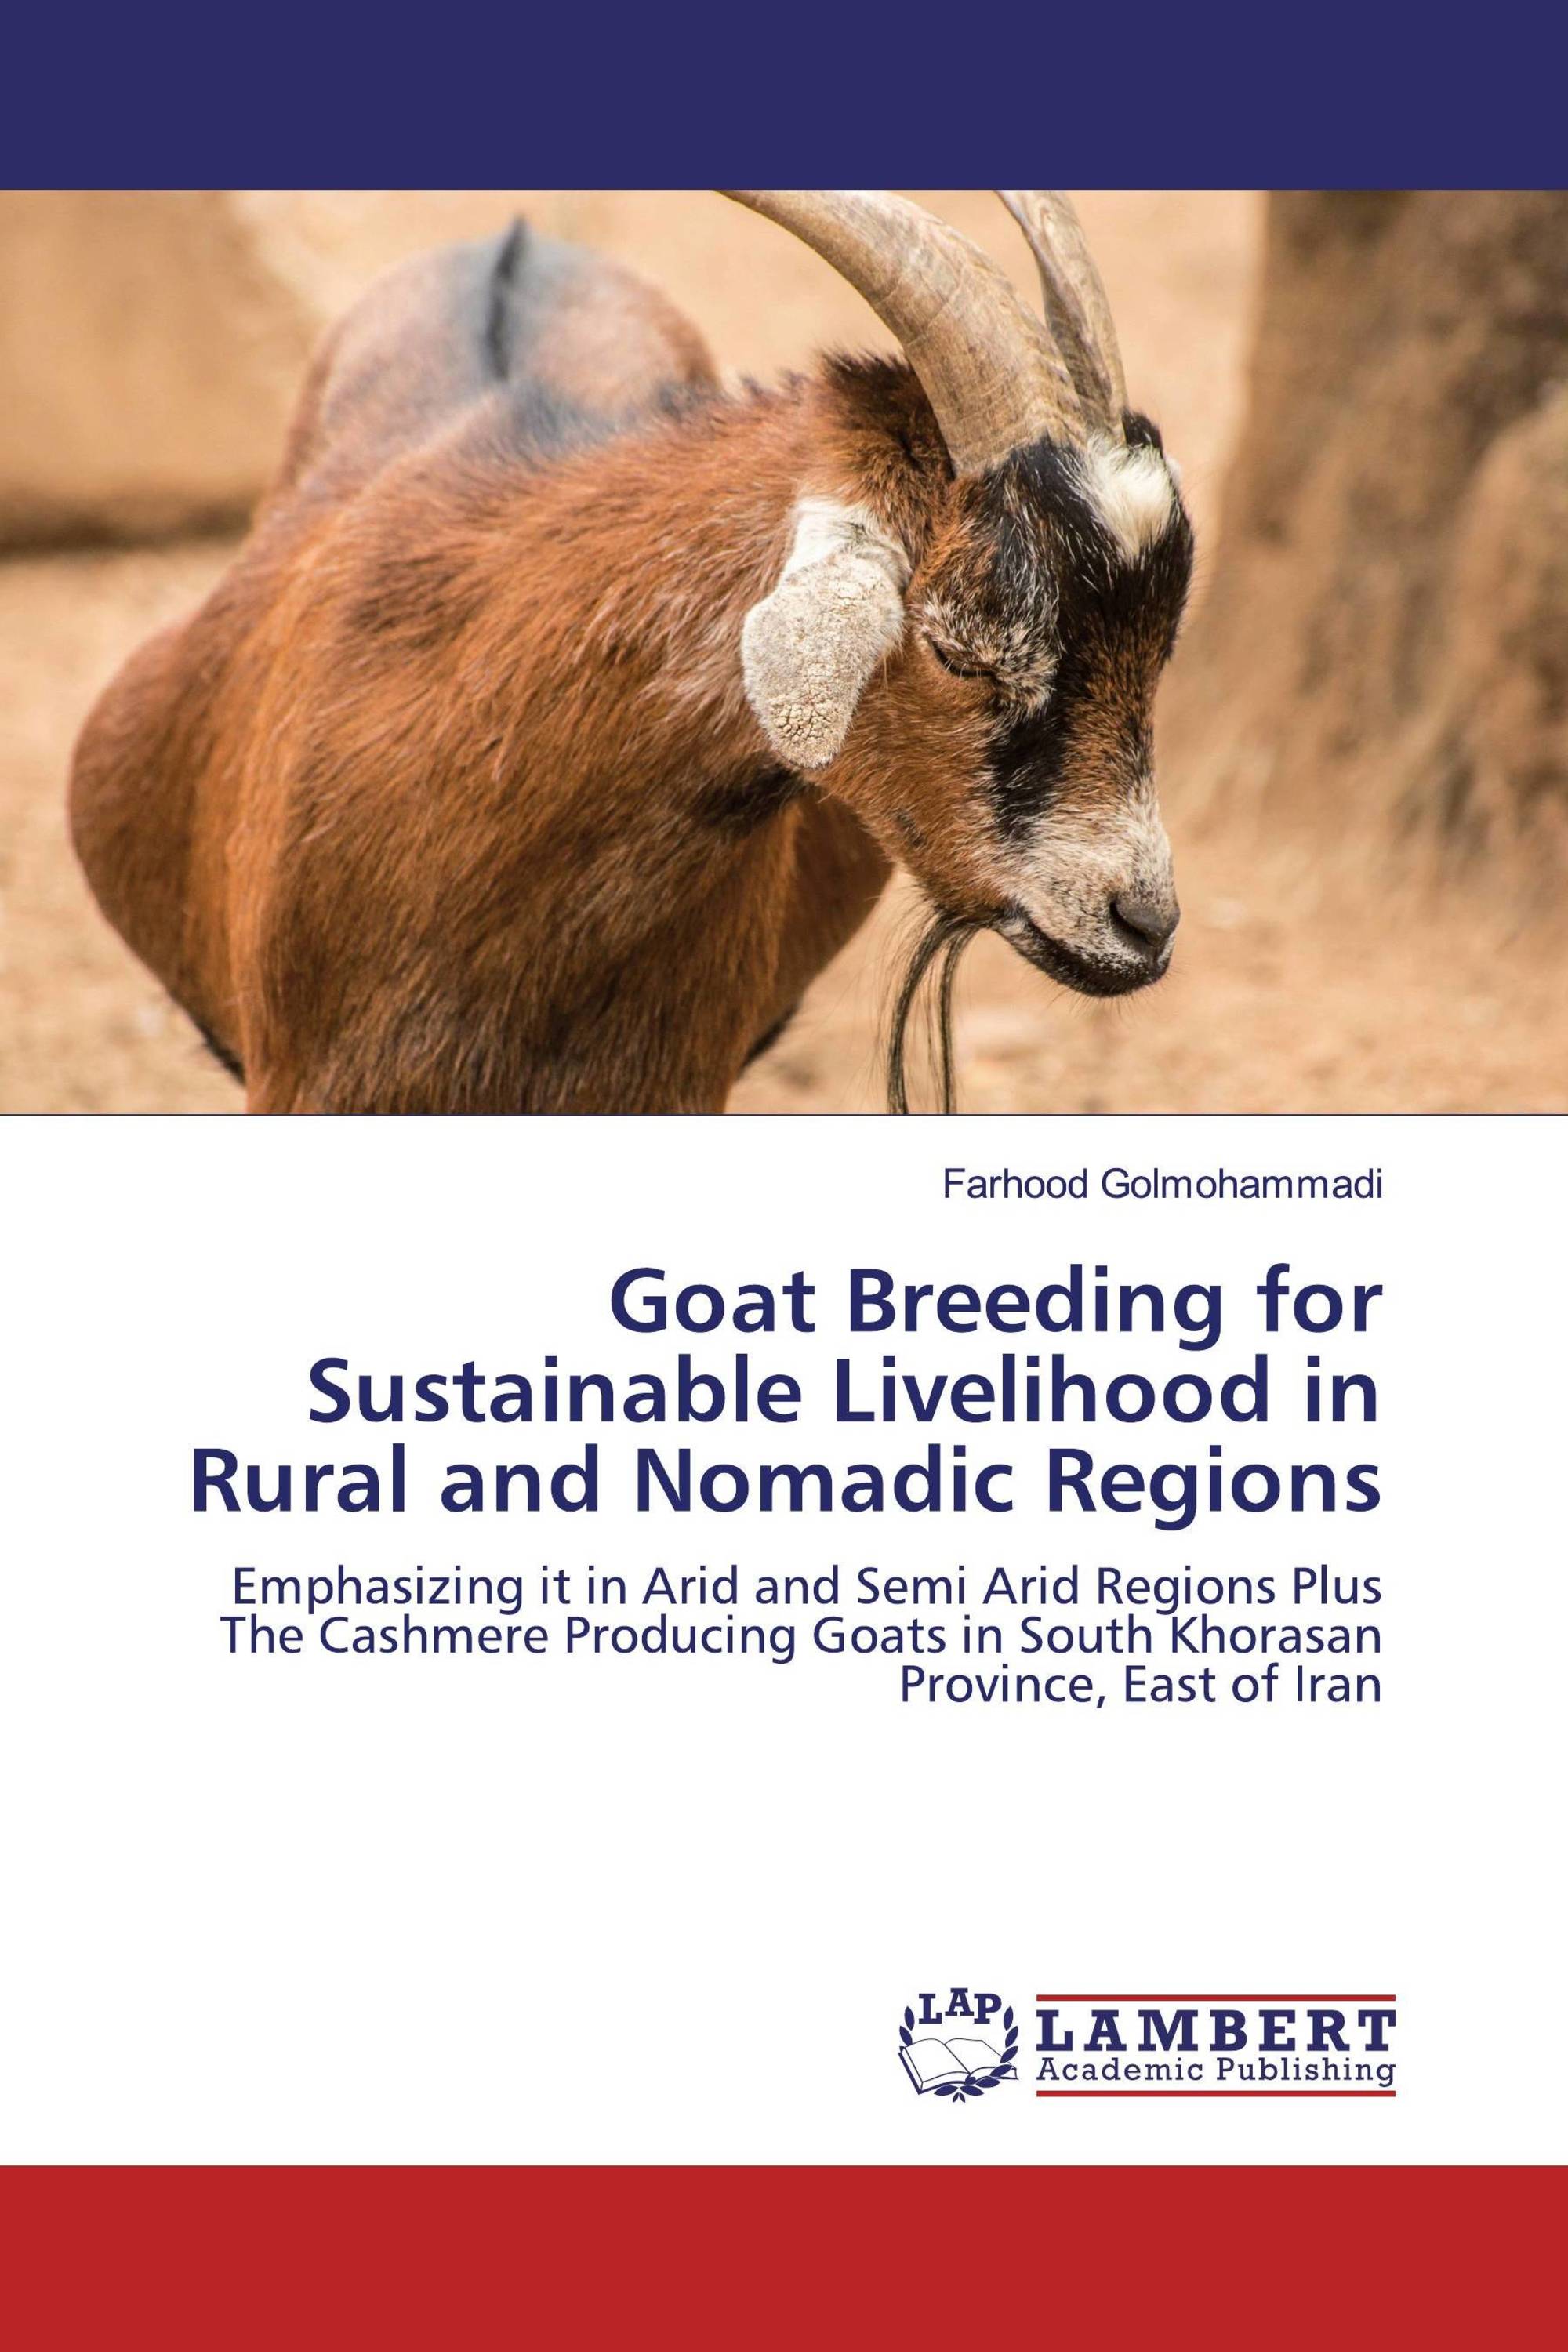 Goat Breeding for Sustainable Livelihood in Rural and Nomadic Regions